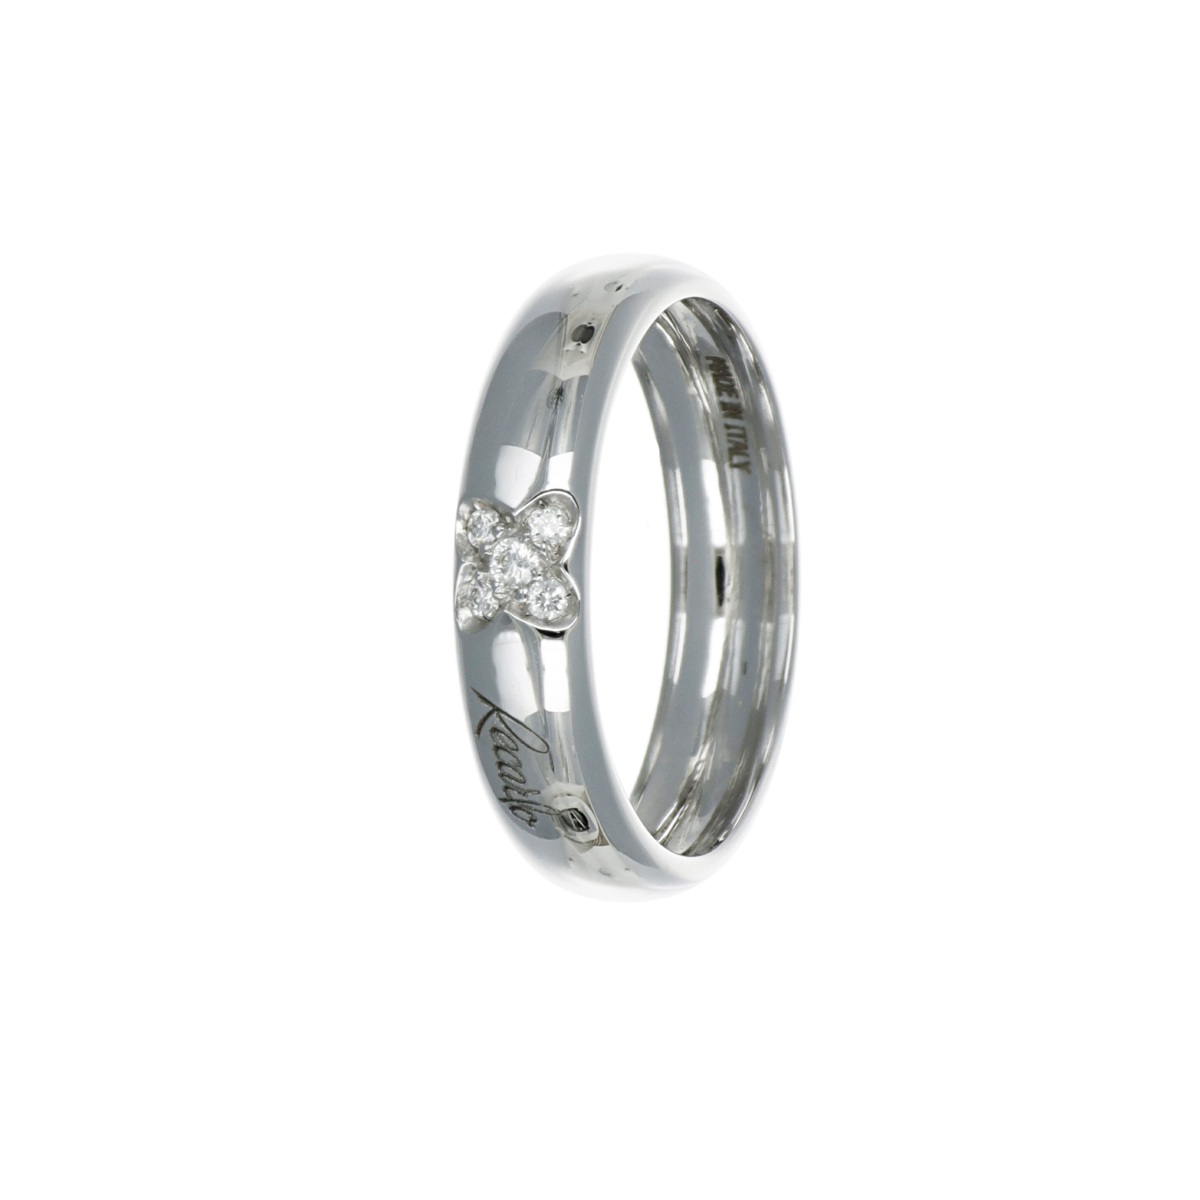 Band ring in white gold and diamonds, Classics collection, 0.40ct - XC001/040B